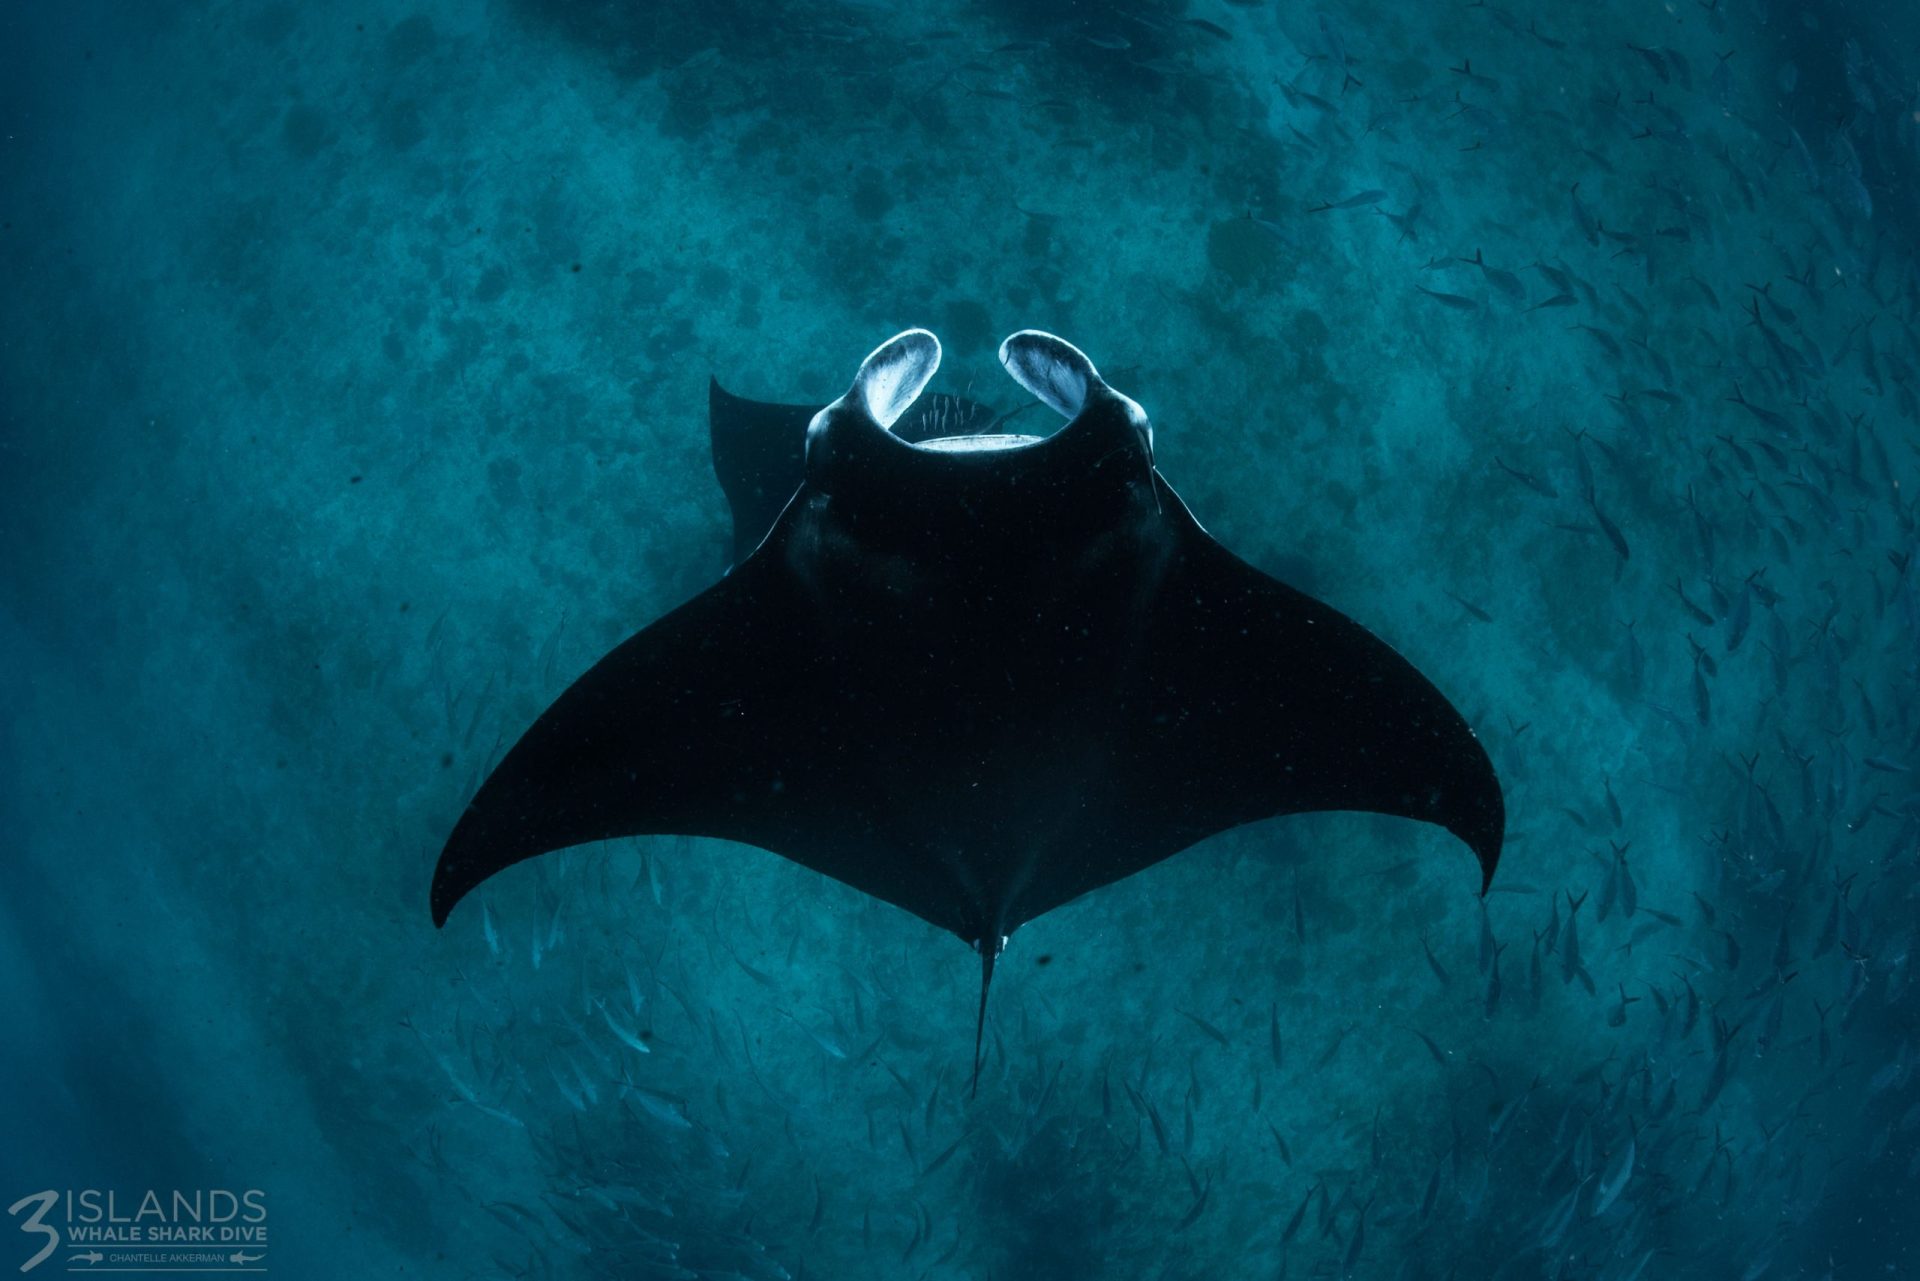 Silhouette of a manta ray swimming above a school of fish in the ocean, with the '3 Islands Whale Shark Dive' watermark.